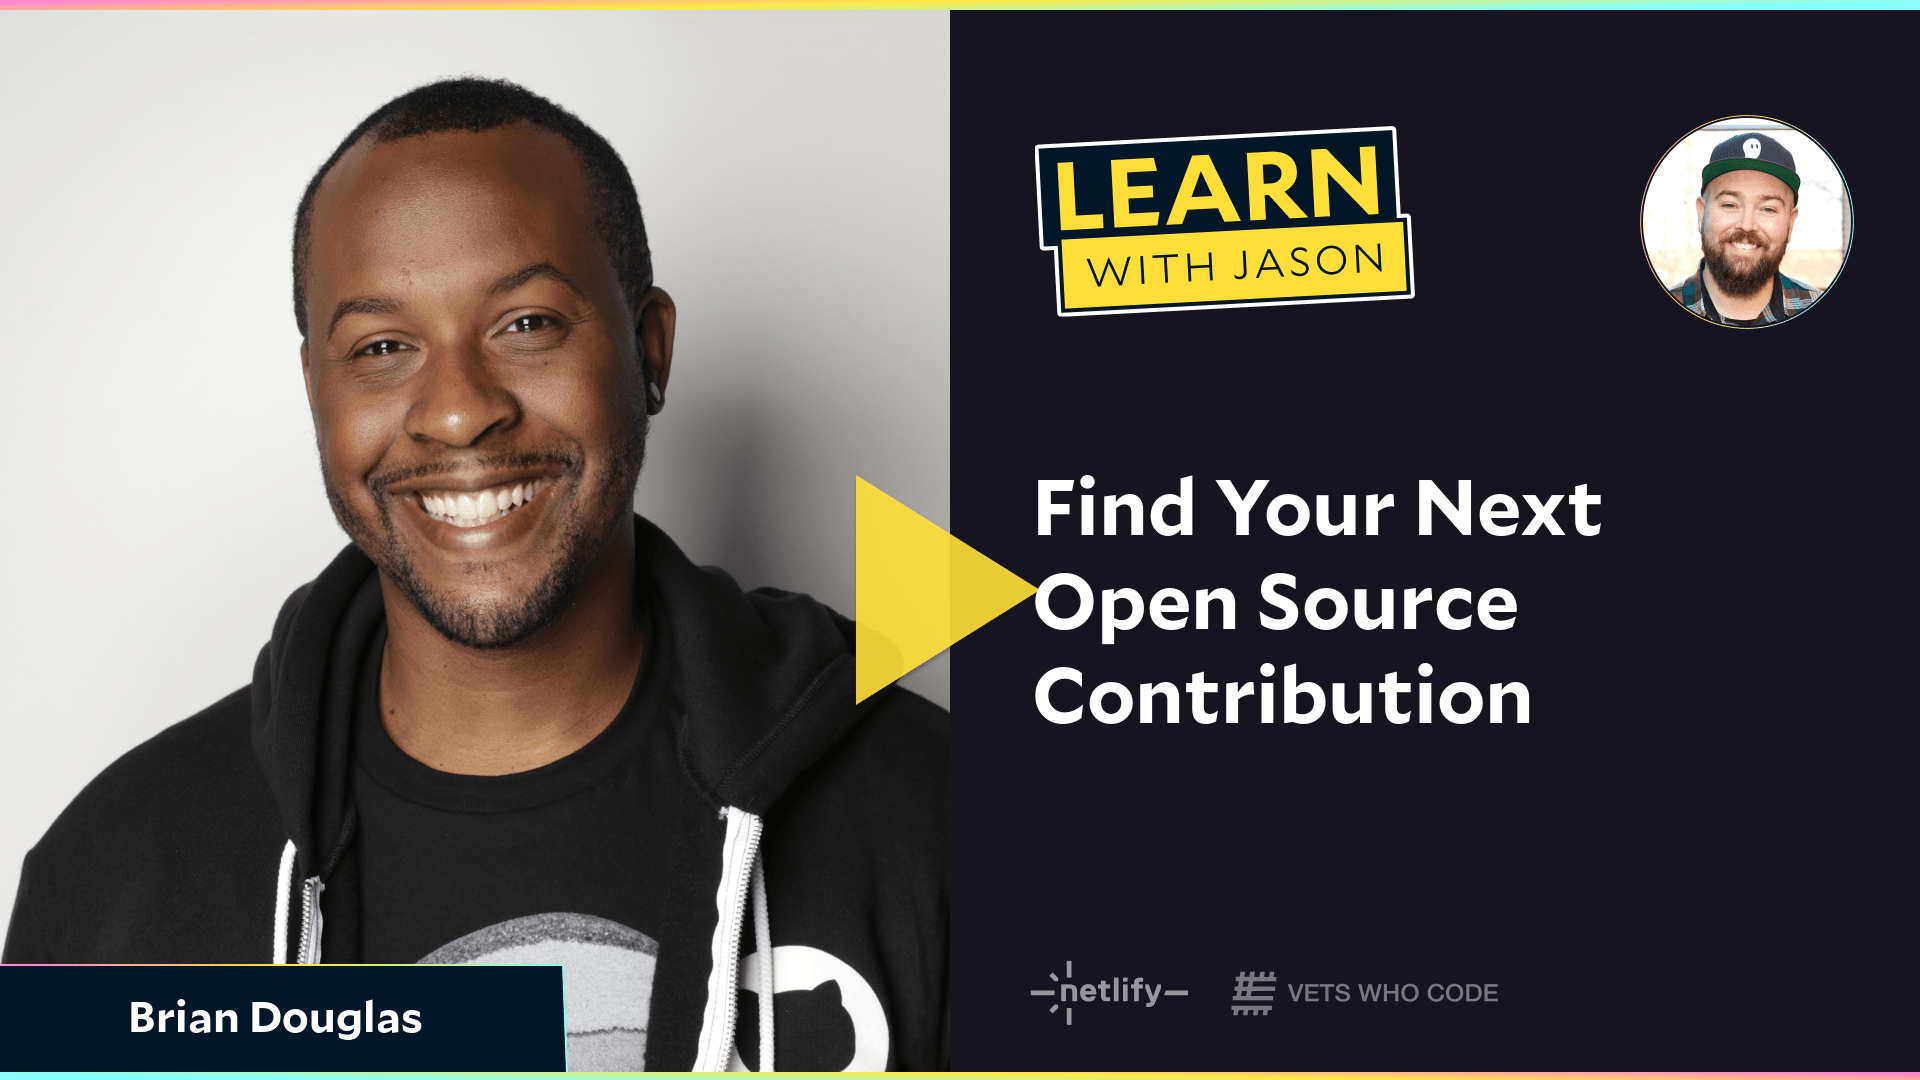 Find Your Next Open Source Contribution (with Brian Douglas)